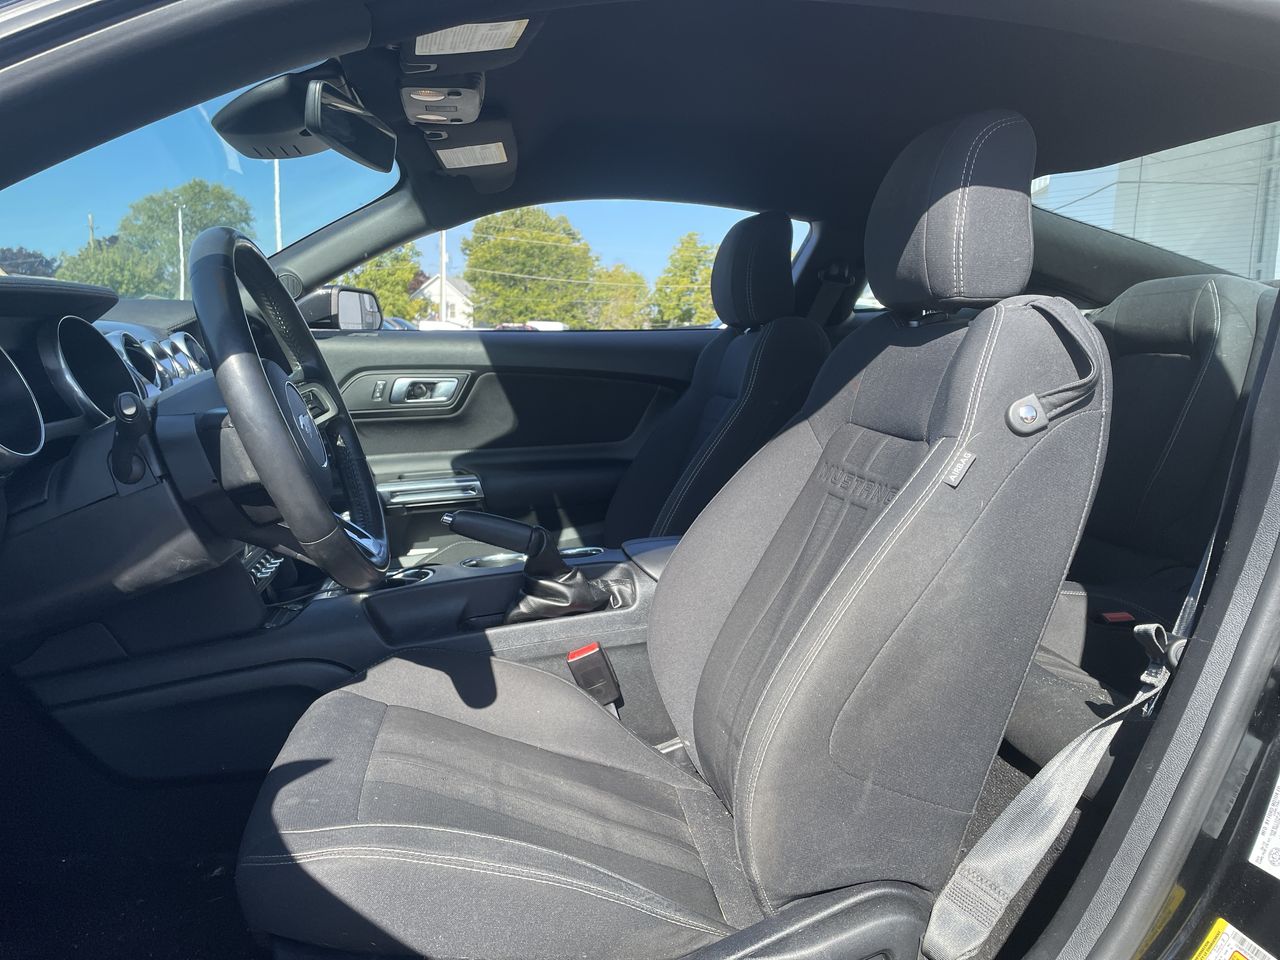 2019 Ford Mustang - P21400 Full Image 11